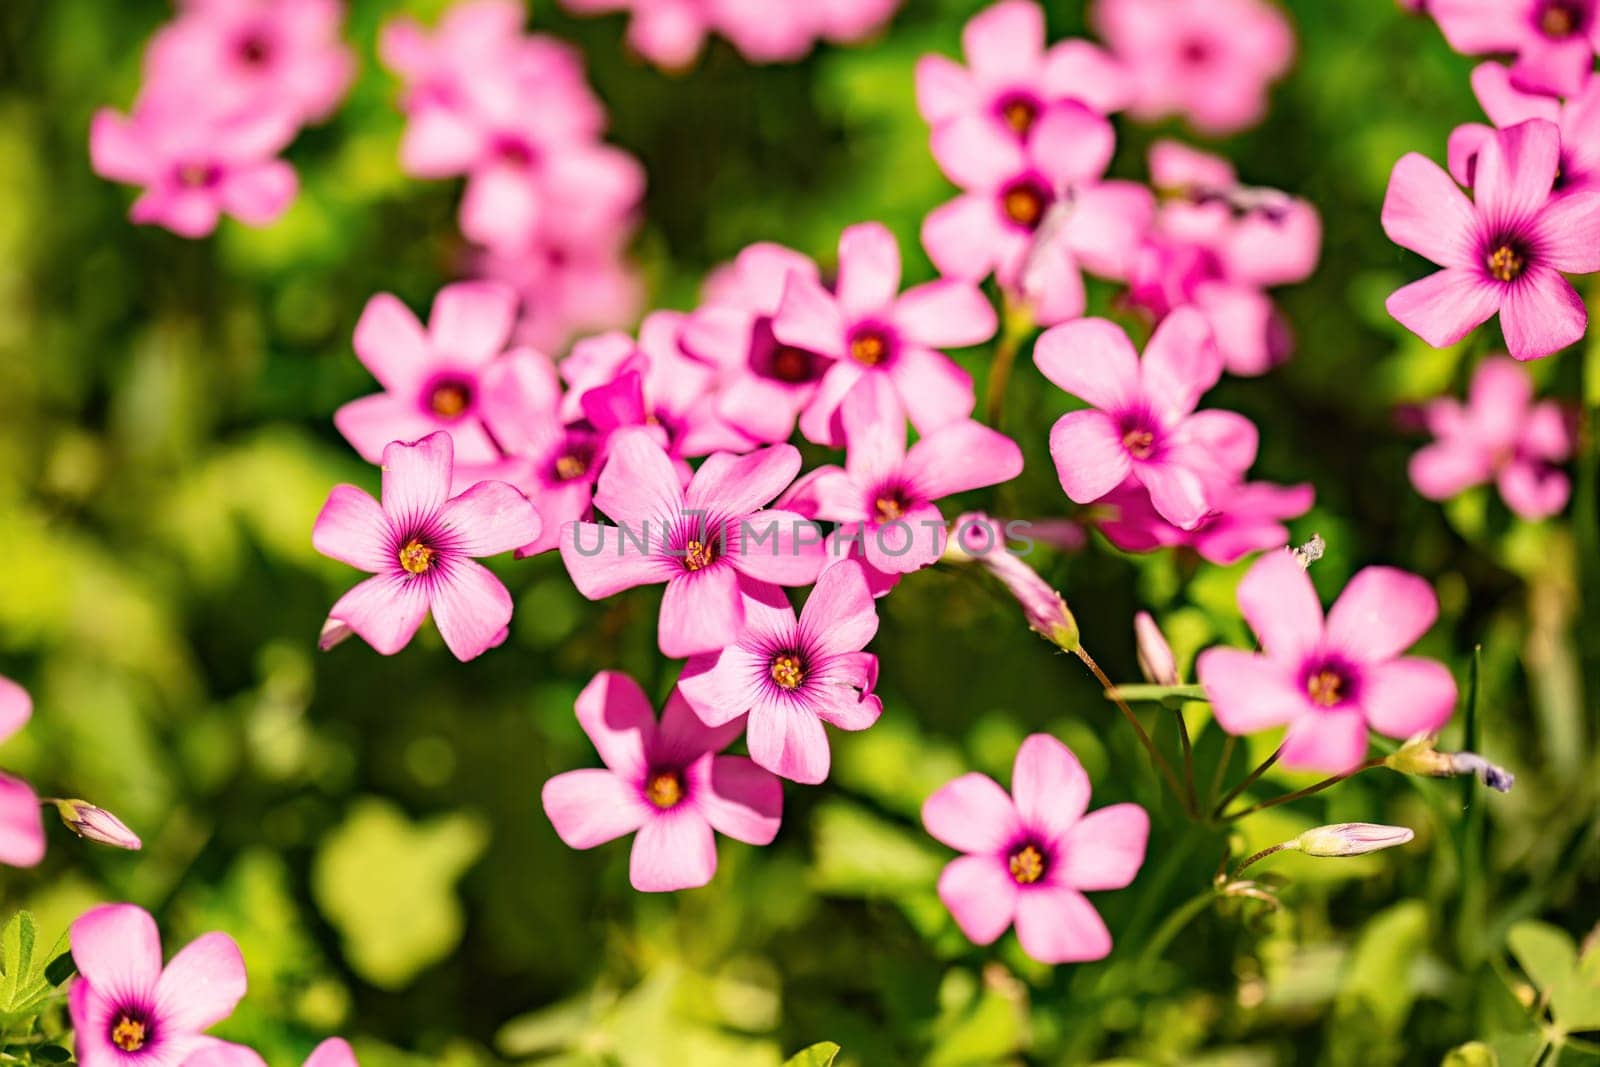 Spring Oxalis Articulata Bloom by pippocarlot